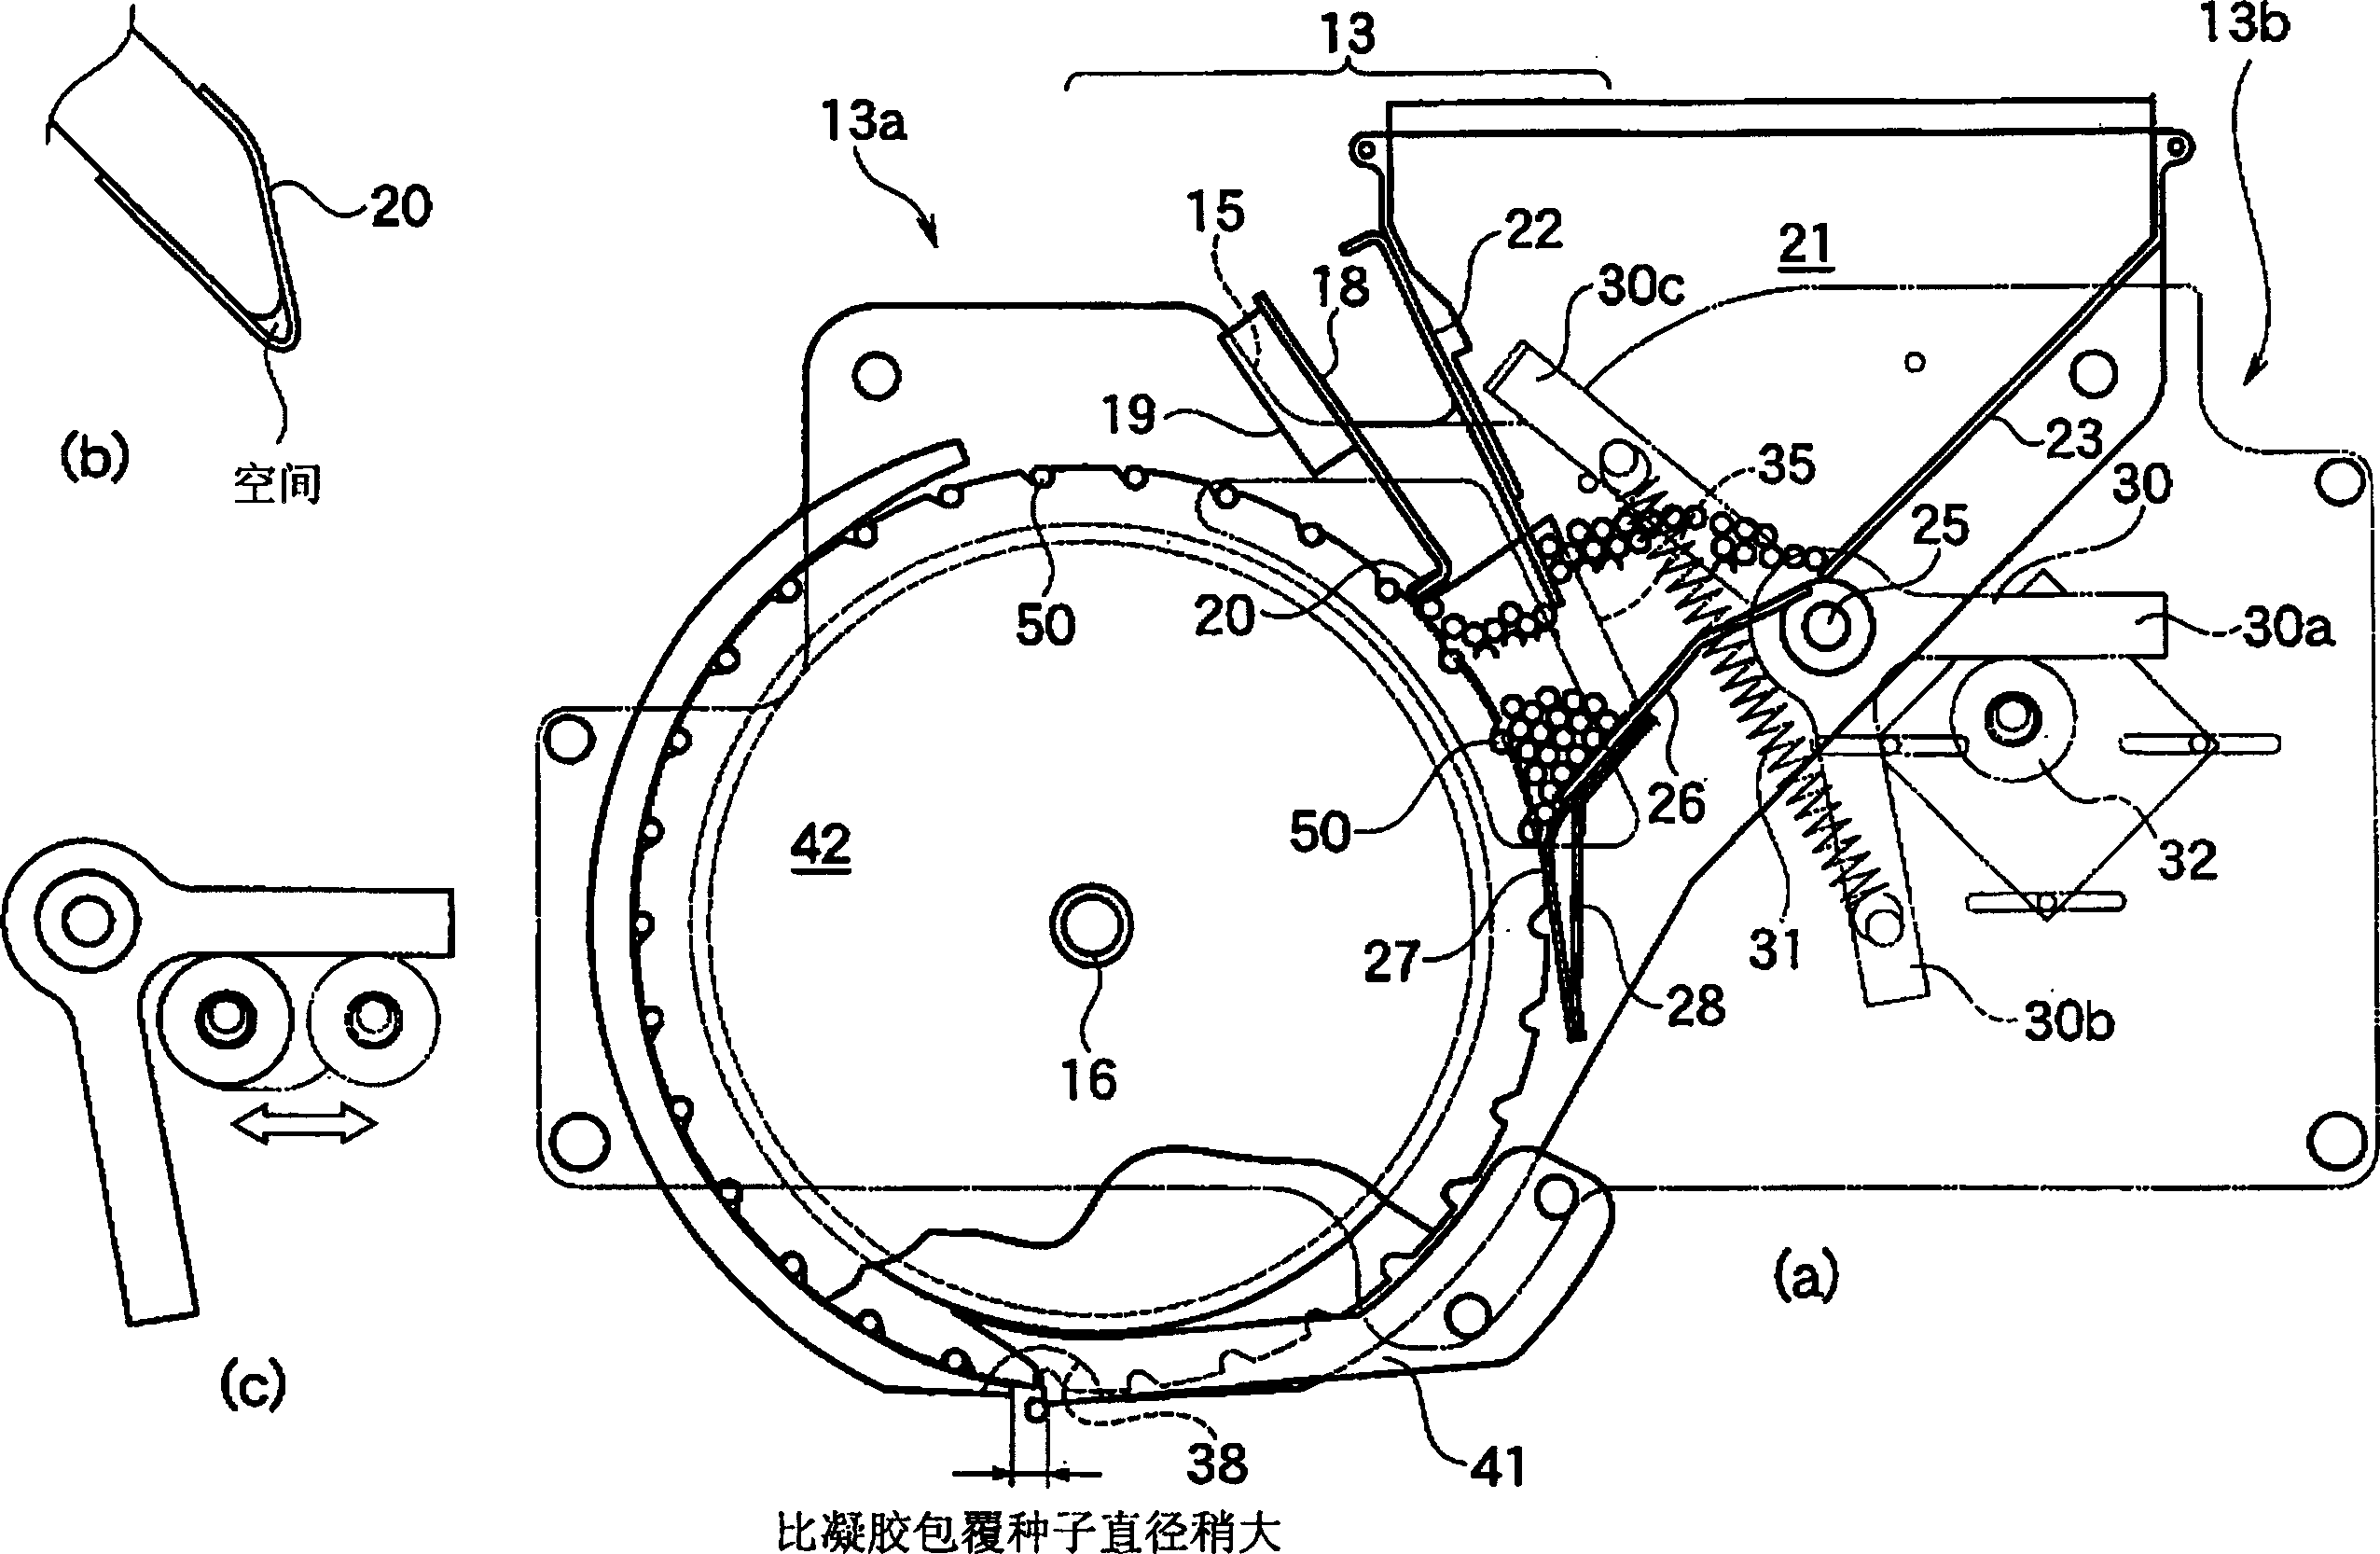 Automatic sphericity falling device and automatic seeding system for plant growth grooved tray